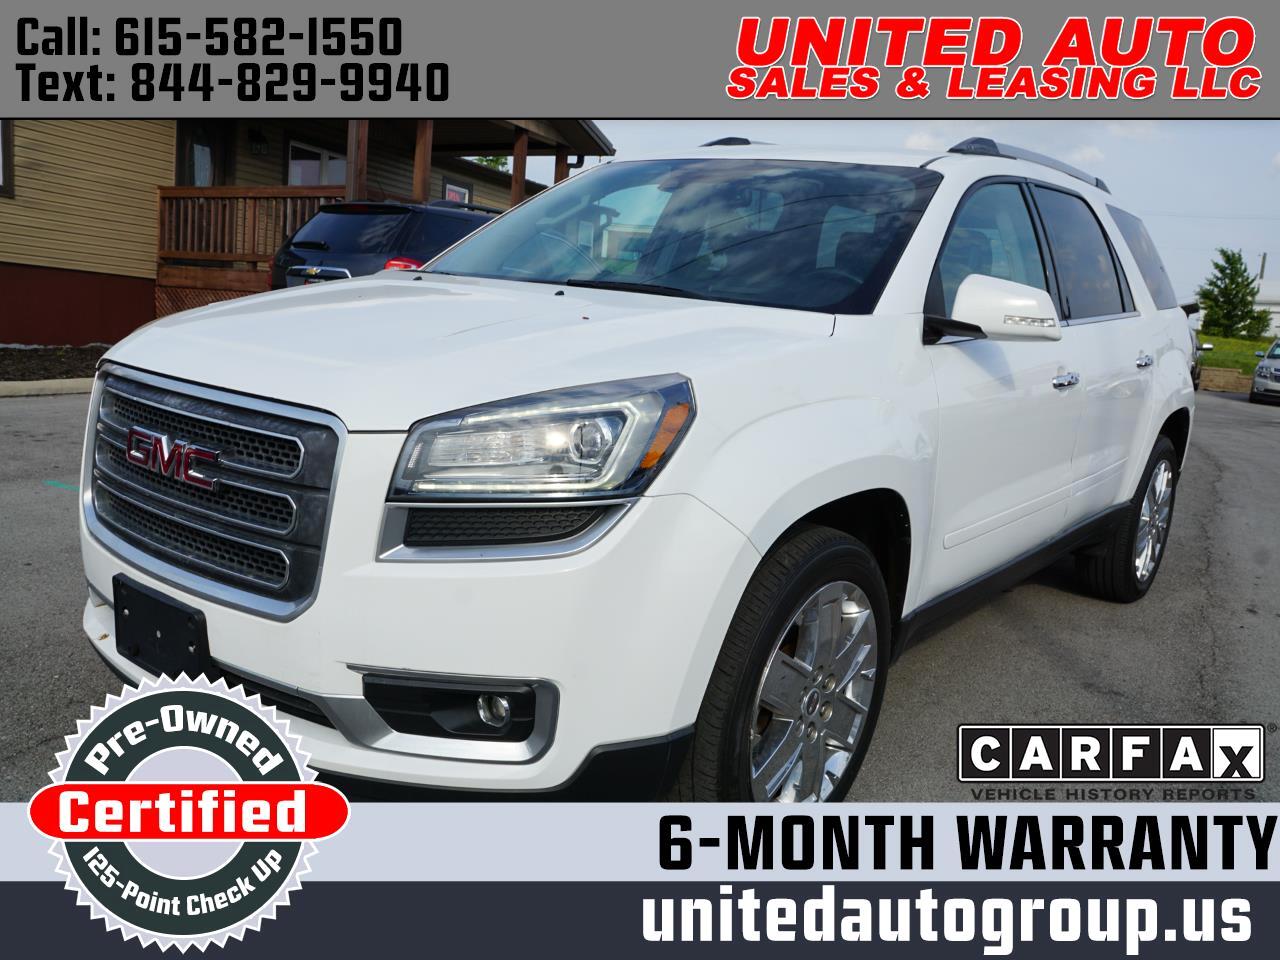 Used 2017 GMC Acadia Limited FWD 4dr Limited for Sale in La Vergne TN 37086  United Auto Sales & Leasing LLC